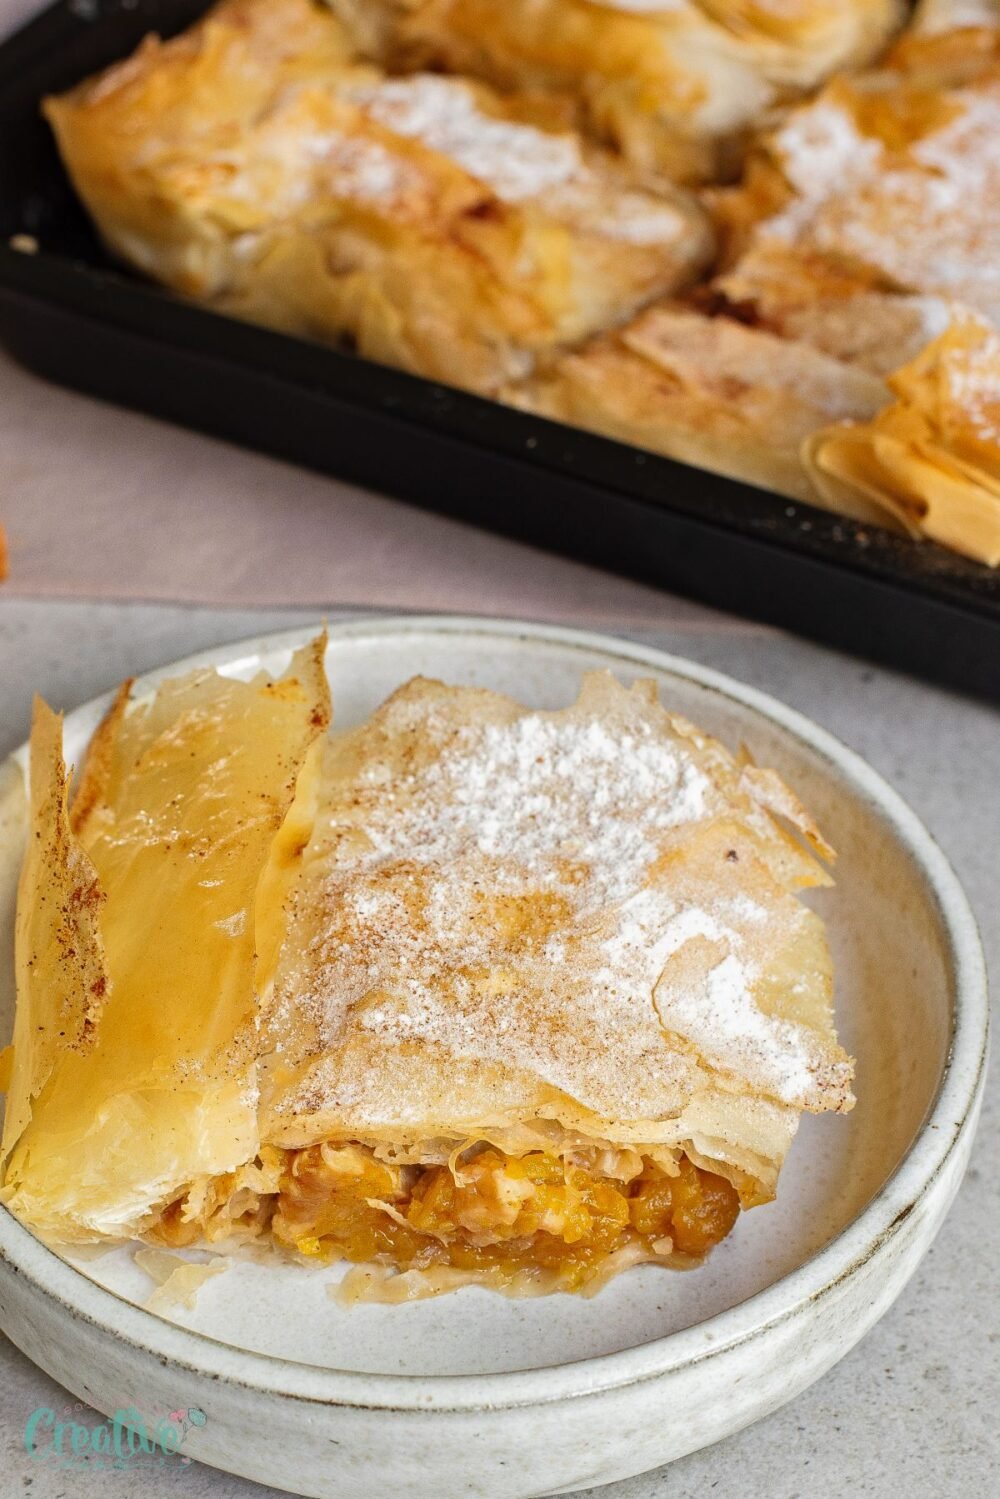 Impress your guests with the perfect fall dessert with this easy filo pumpkin pie, featuring a crisp filo pastry and rich, spiced pumpkin filling.